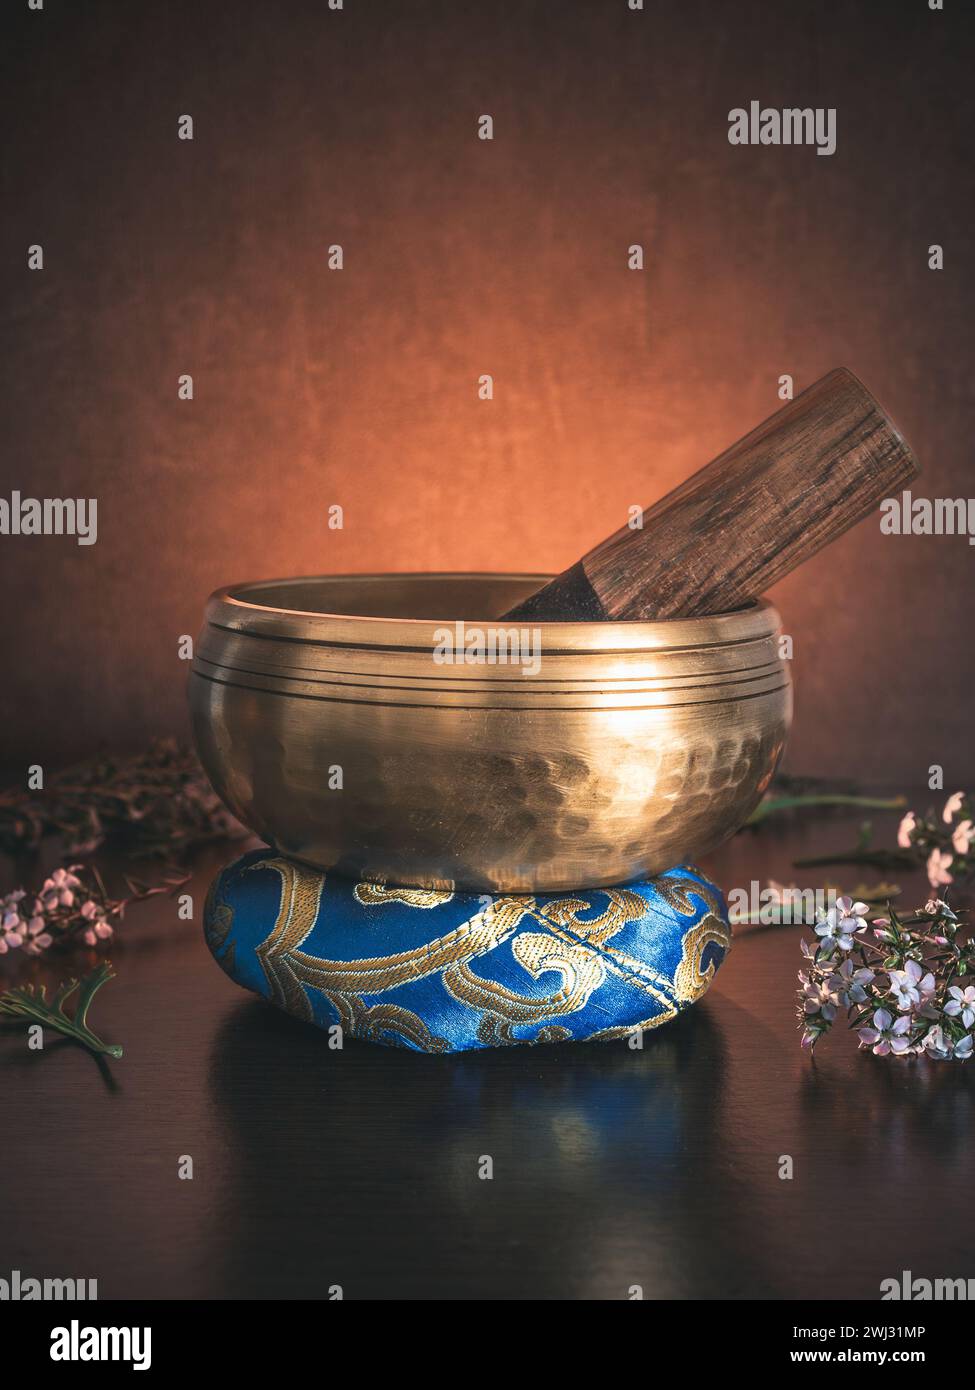 A Tibetan singing bowl sits on a ring cushion amid leaves and flowers, bathed in golden backlight against a dark background Stock Photo